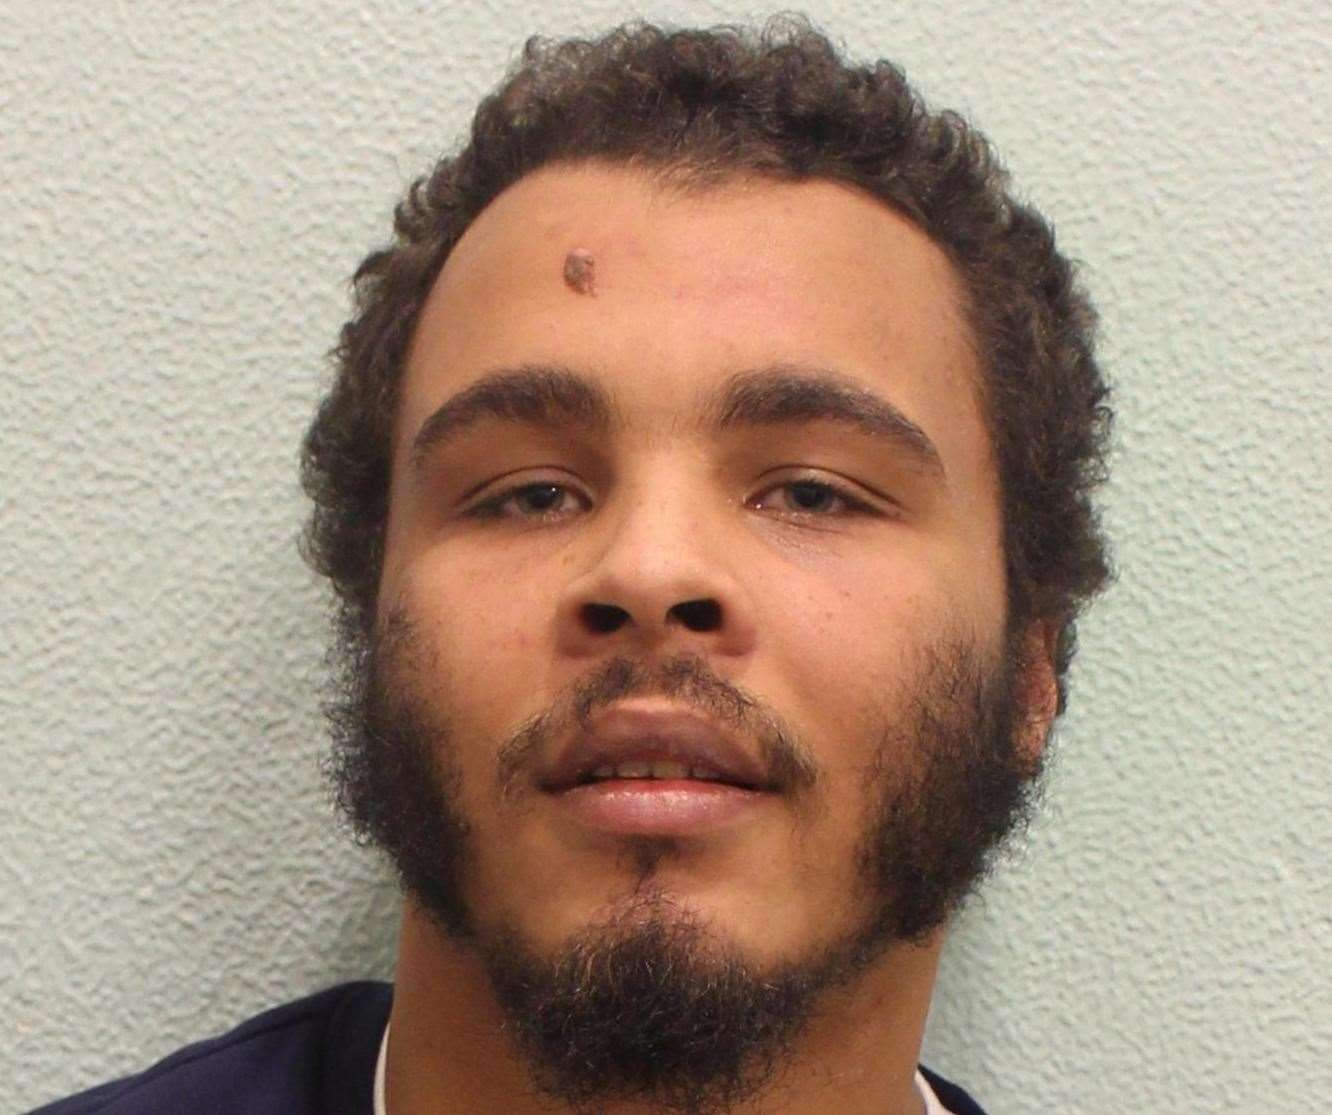 Jordan Bailey-Mascoll, 25, was convicted of murdering Bromley father Danny Pearce